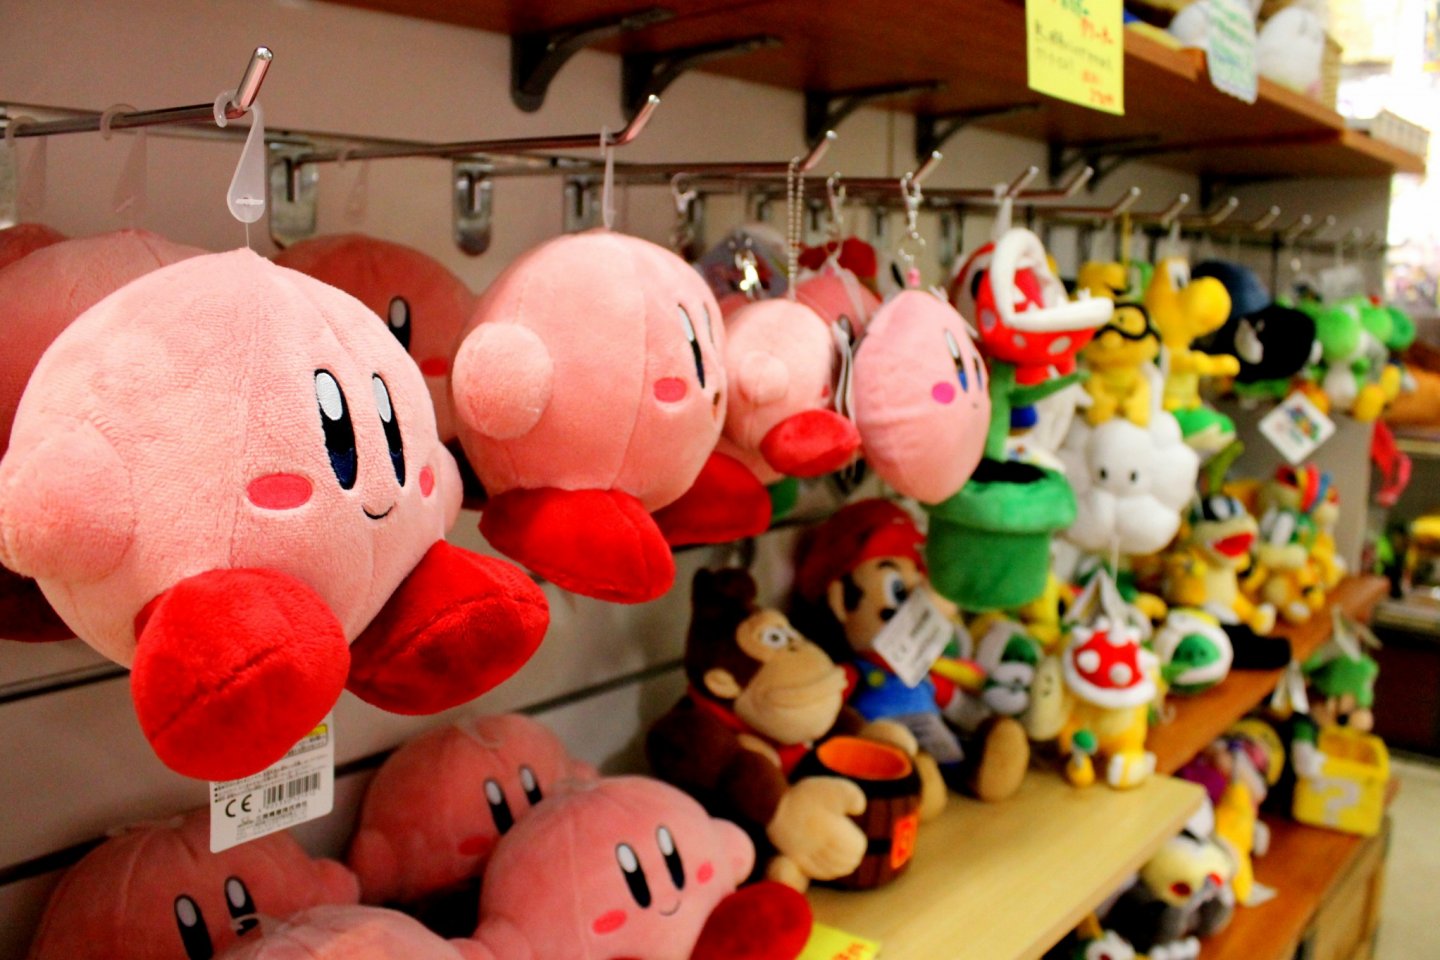 Be animated by their cute stuffed toys hanging from the rows of shelves.